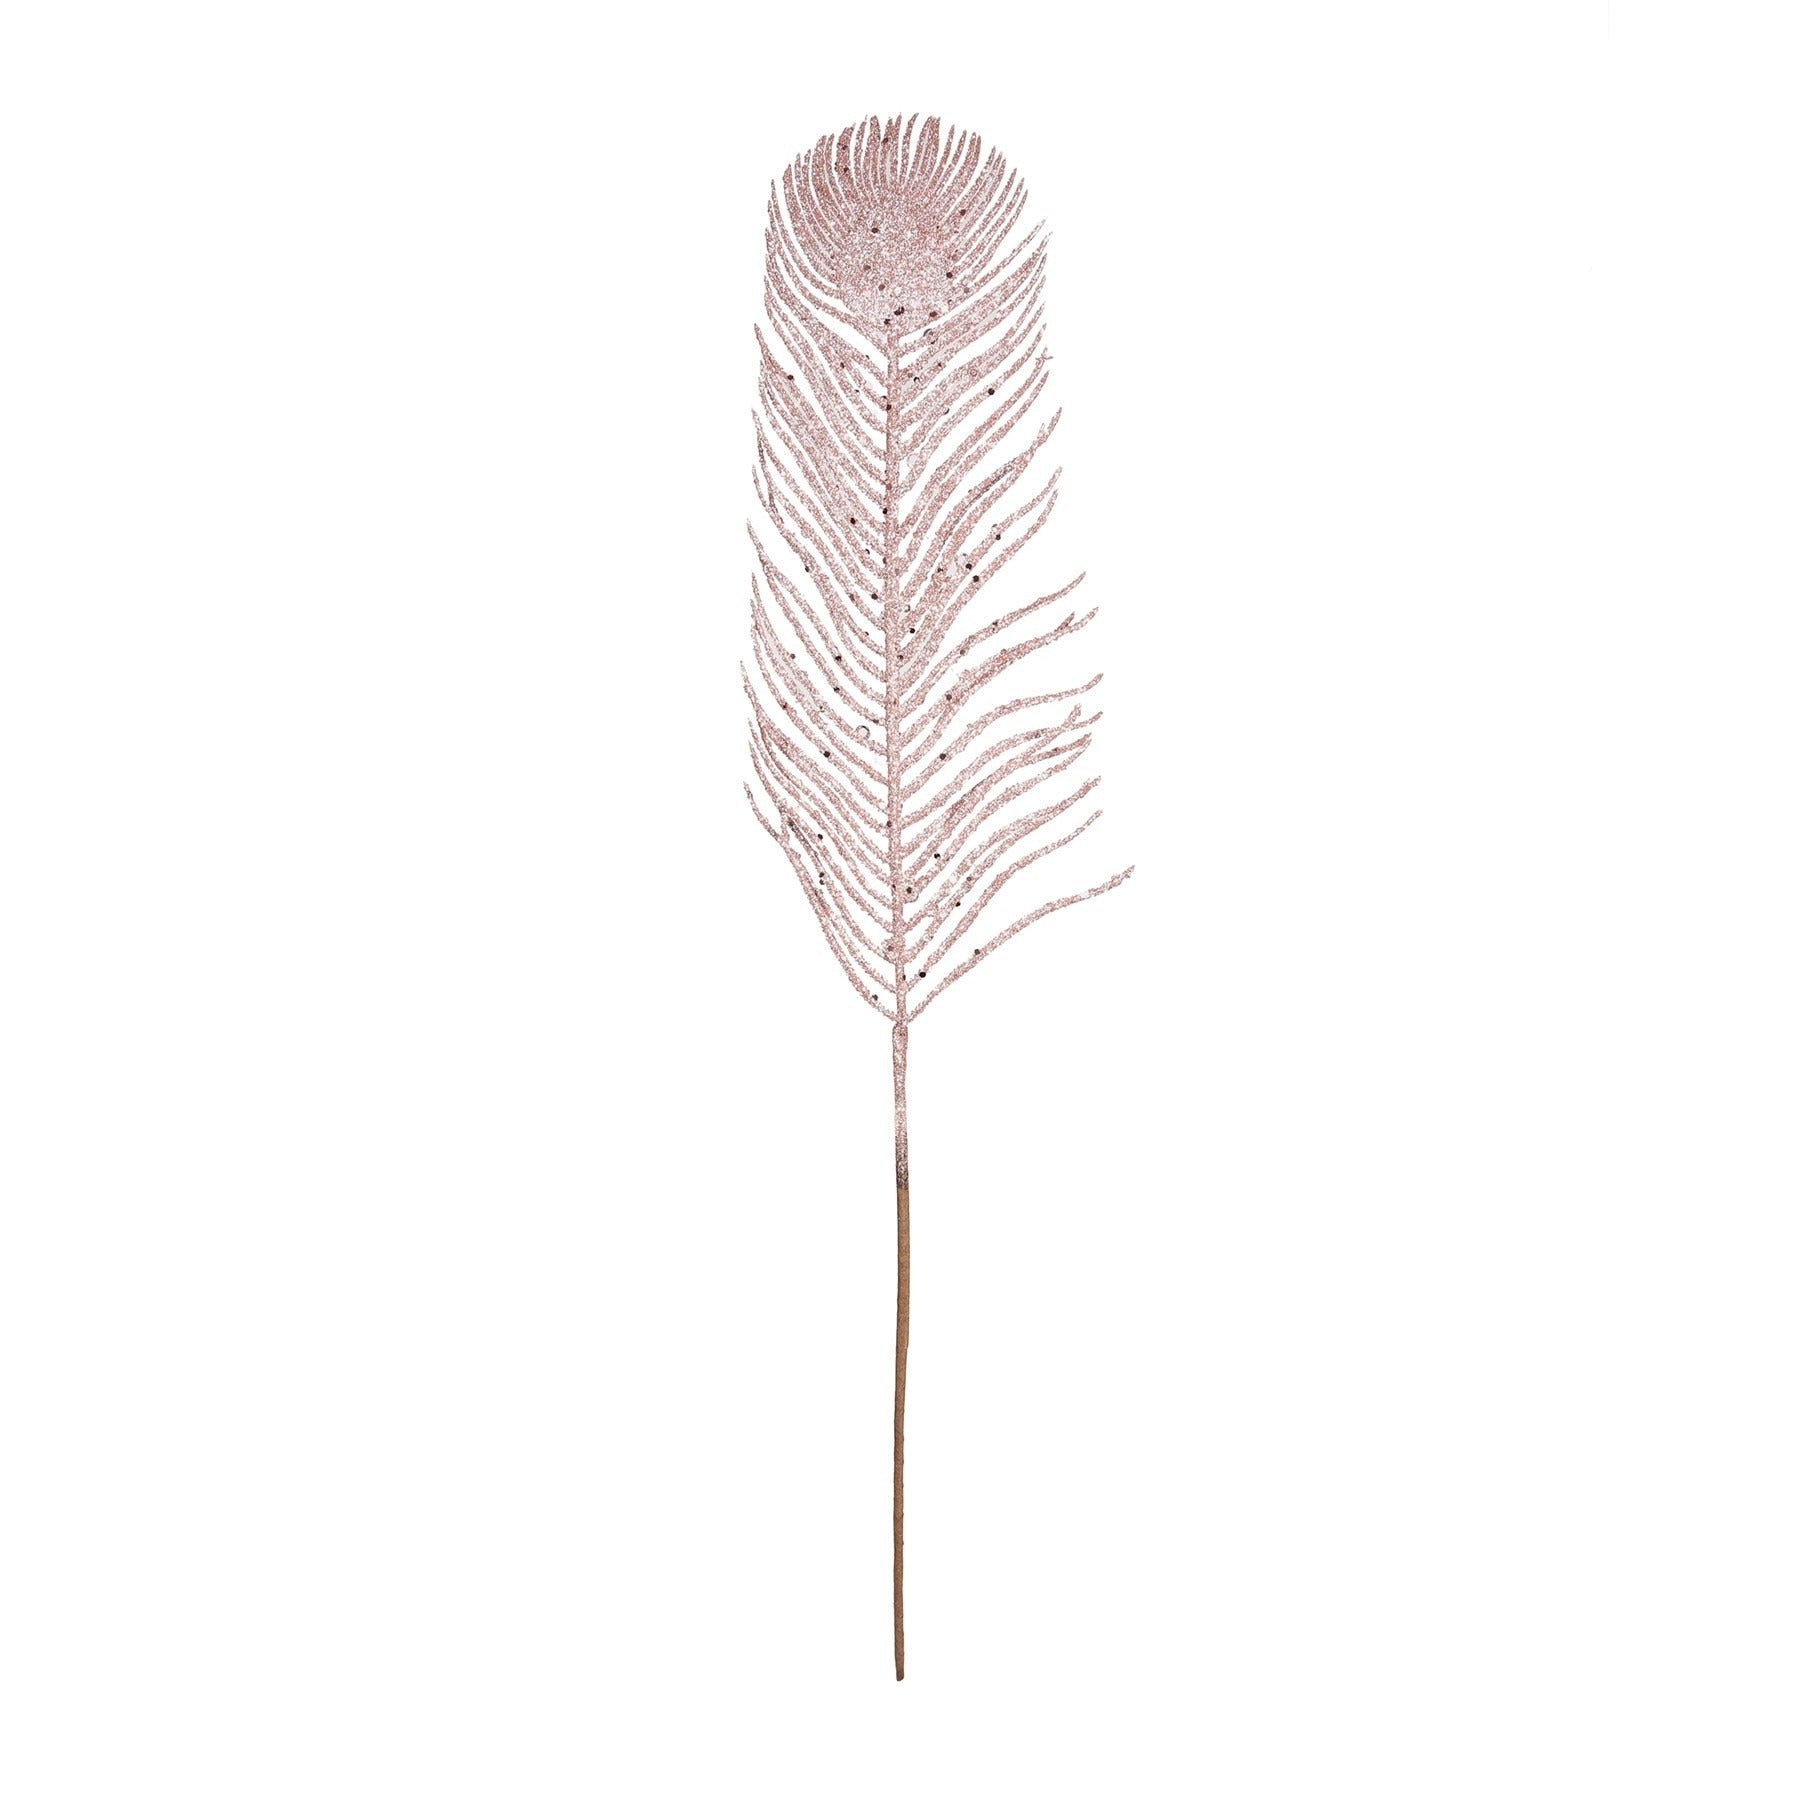 View Pink Glitter Feather Stem H67cm information